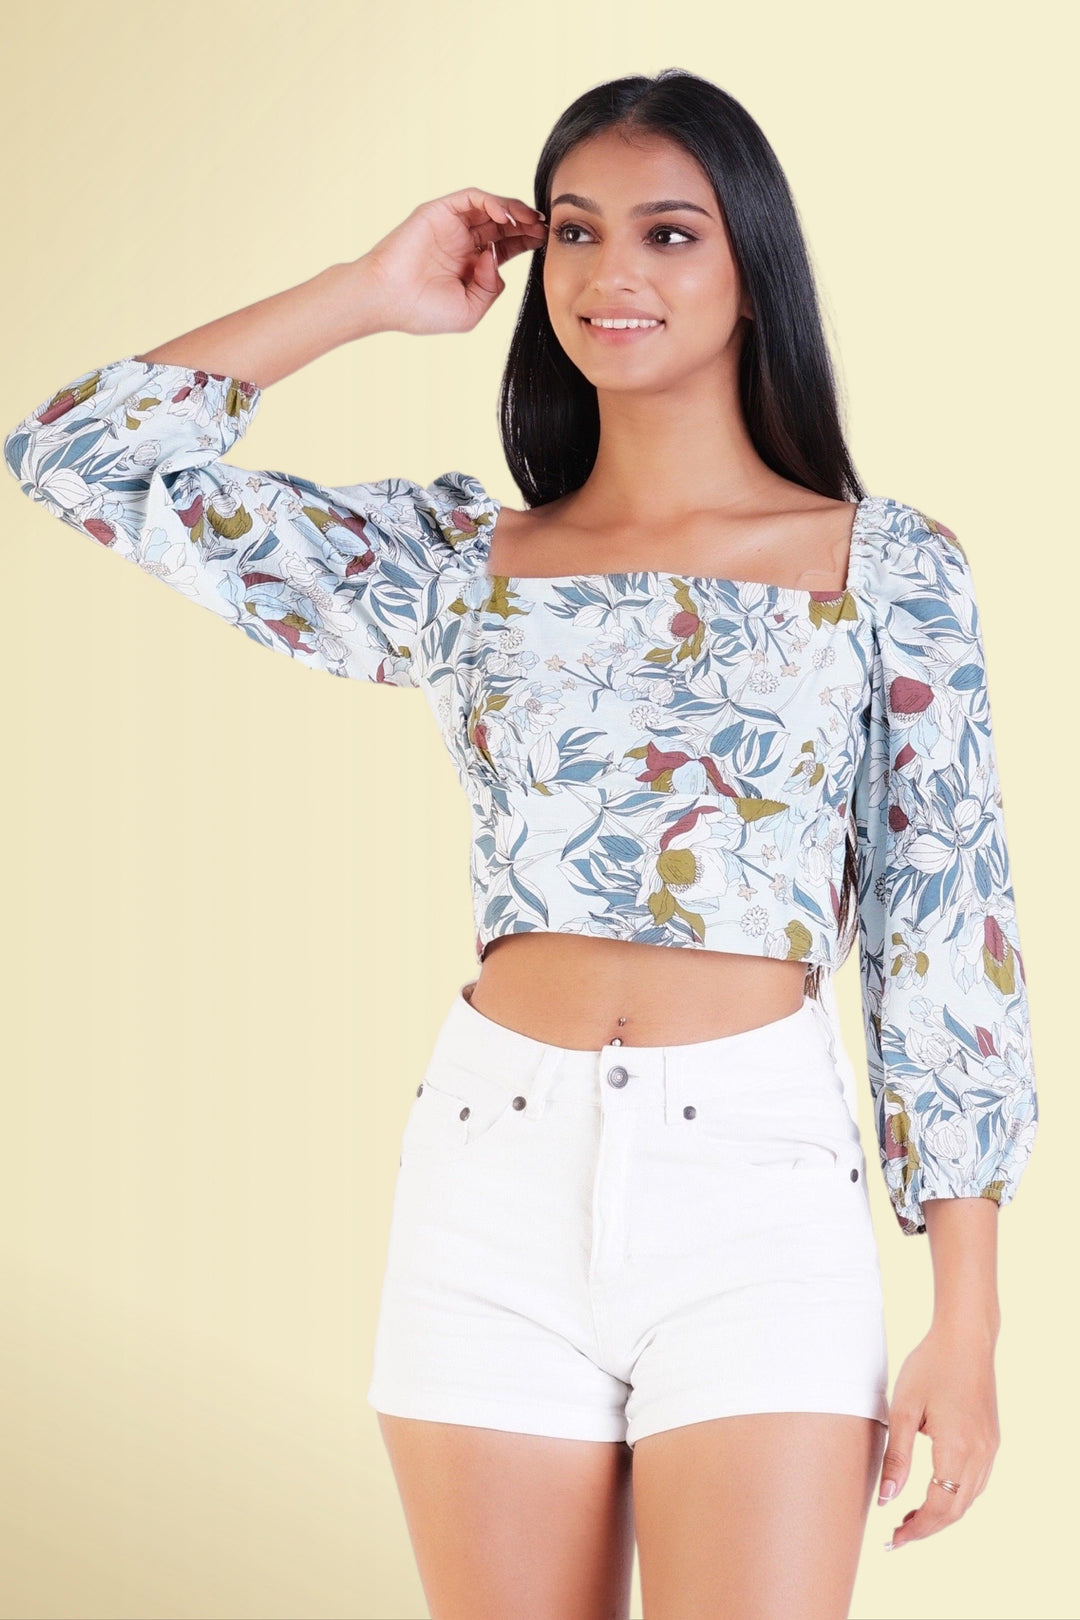 Printed Square Neck Crop Top - Slim Fit, Top, Evening Top, Holiday, Holiday Tops, Short Sleeves, Slim Fit - MONDY, Sri Lankan women's clothing office wear party dresses jackets pants comfort,